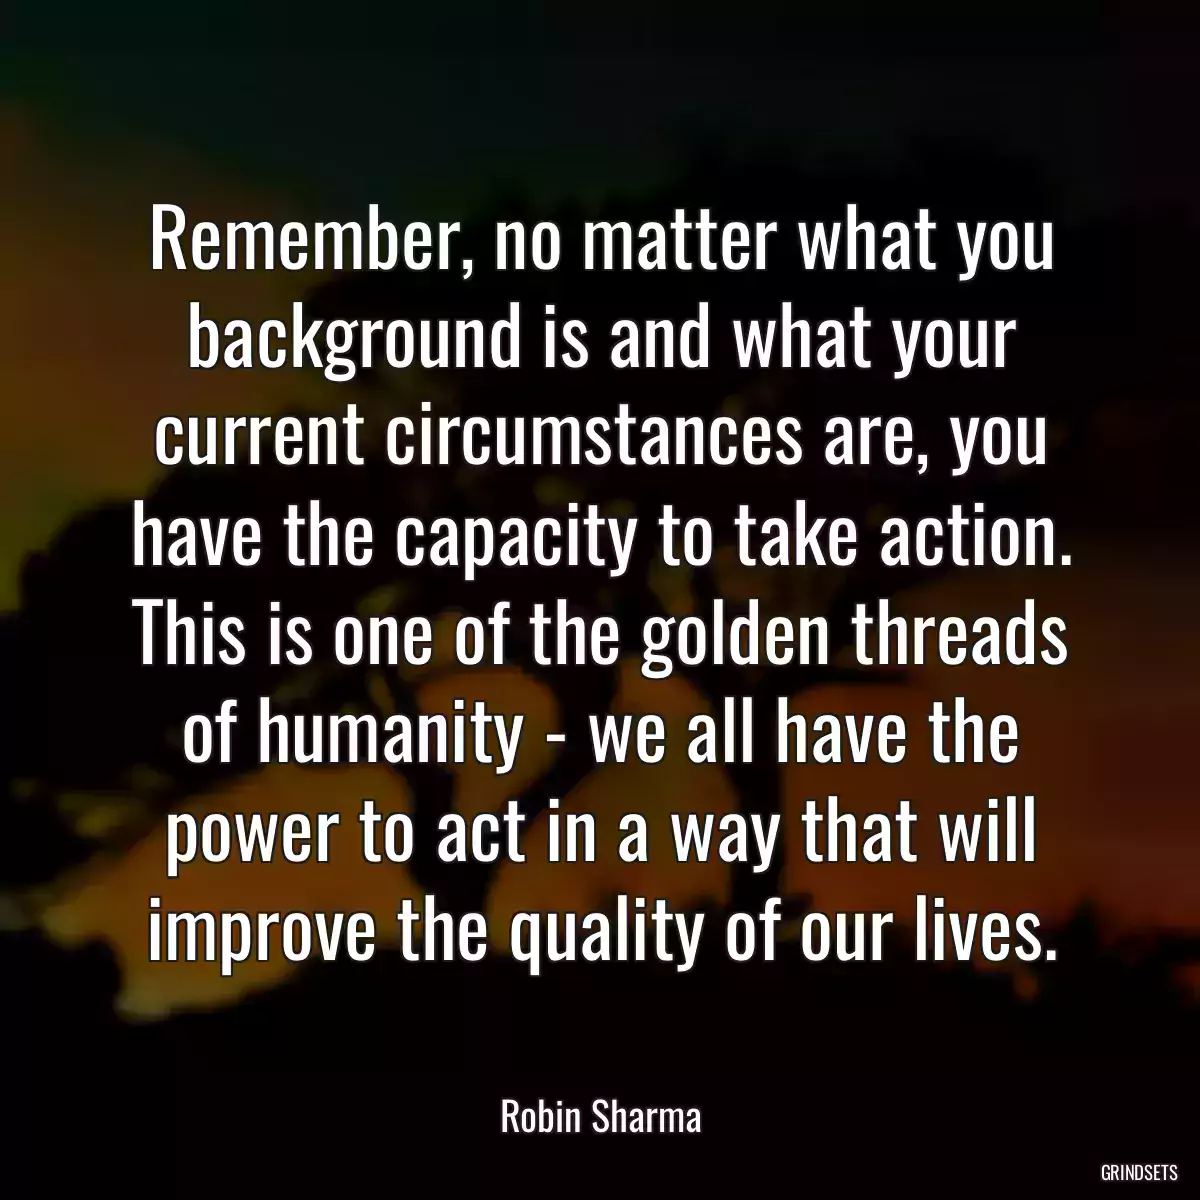 Remember, no matter what you background is and what your current circumstances are, you have the capacity to take action. This is one of the golden threads of humanity - we all have the power to act in a way that will improve the quality of our lives.